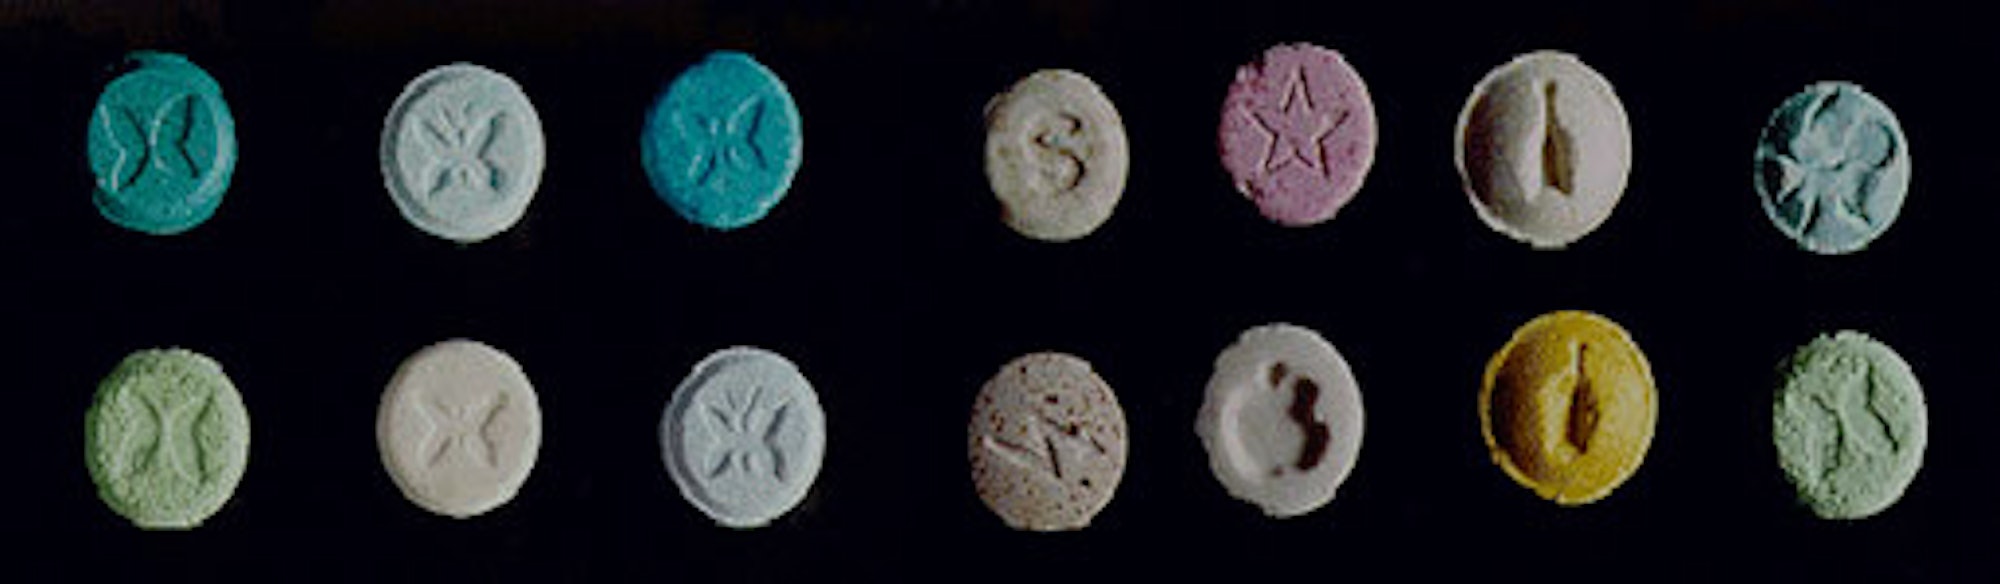 Hair Tests Show That Ecstasy Contains Multiple Different Drugs